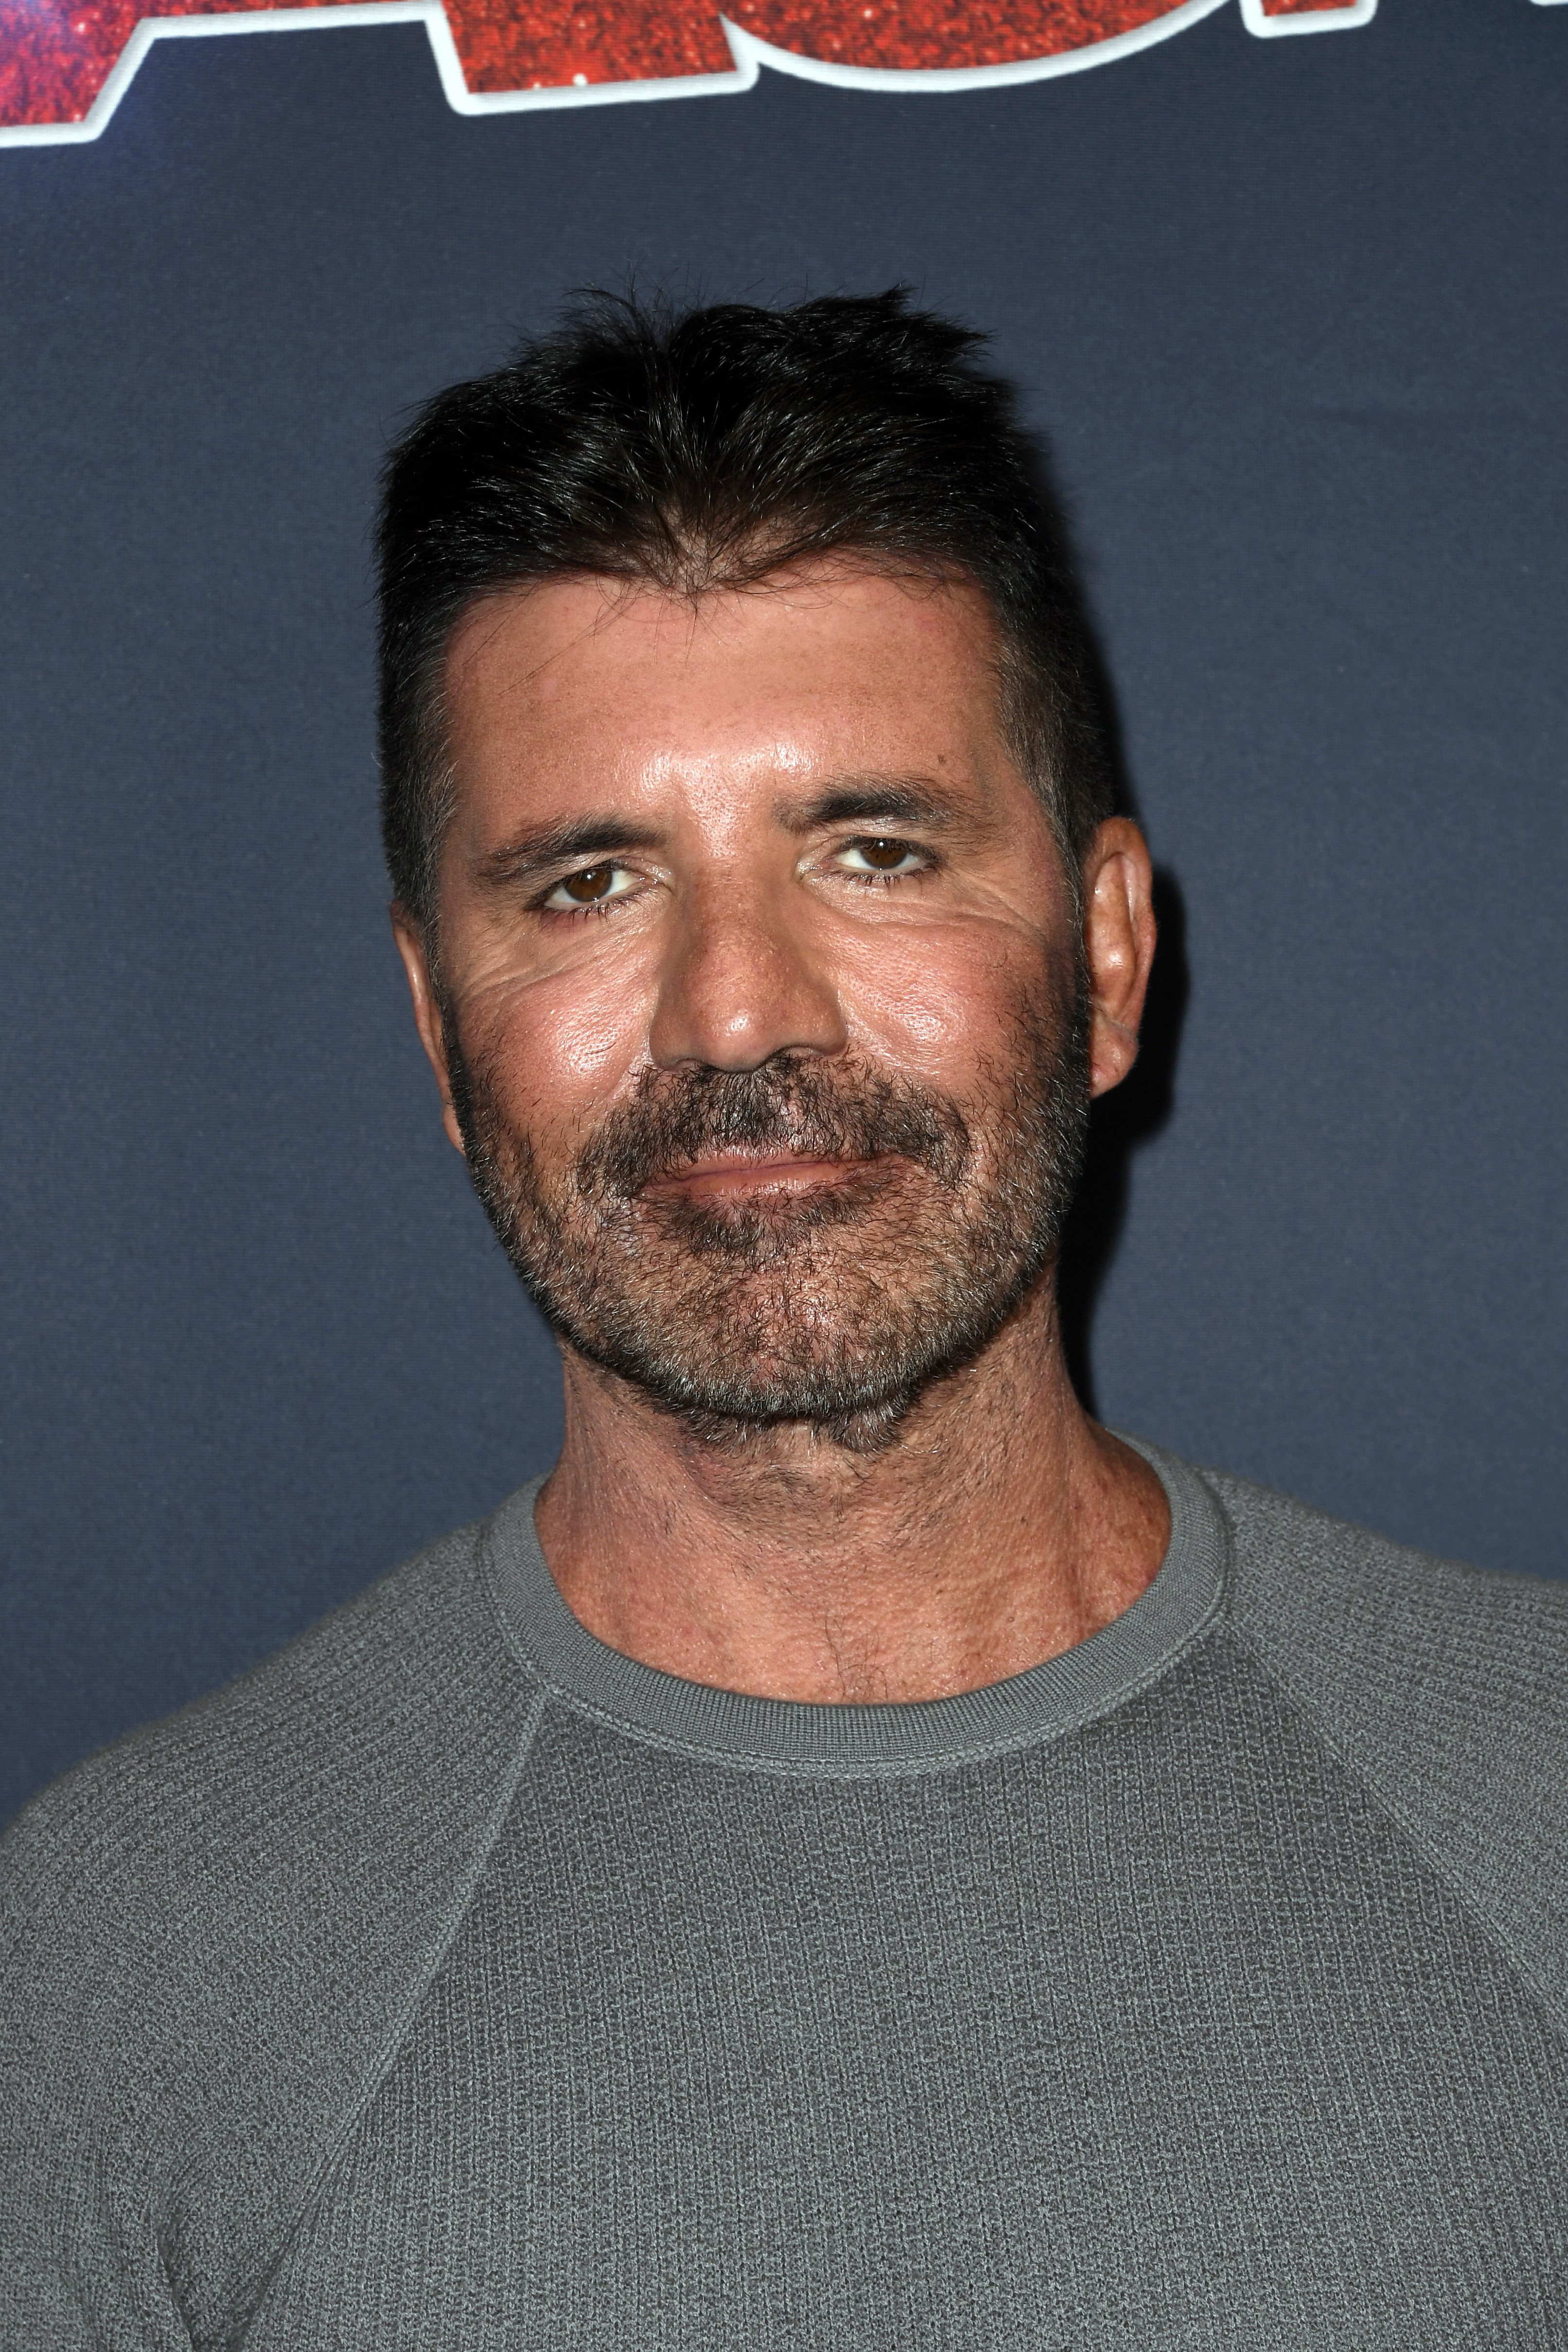 Simon Cowell attends live show of "America's Got Talent" in Hollywood on August 13, 2019 | Photo: Getty Images